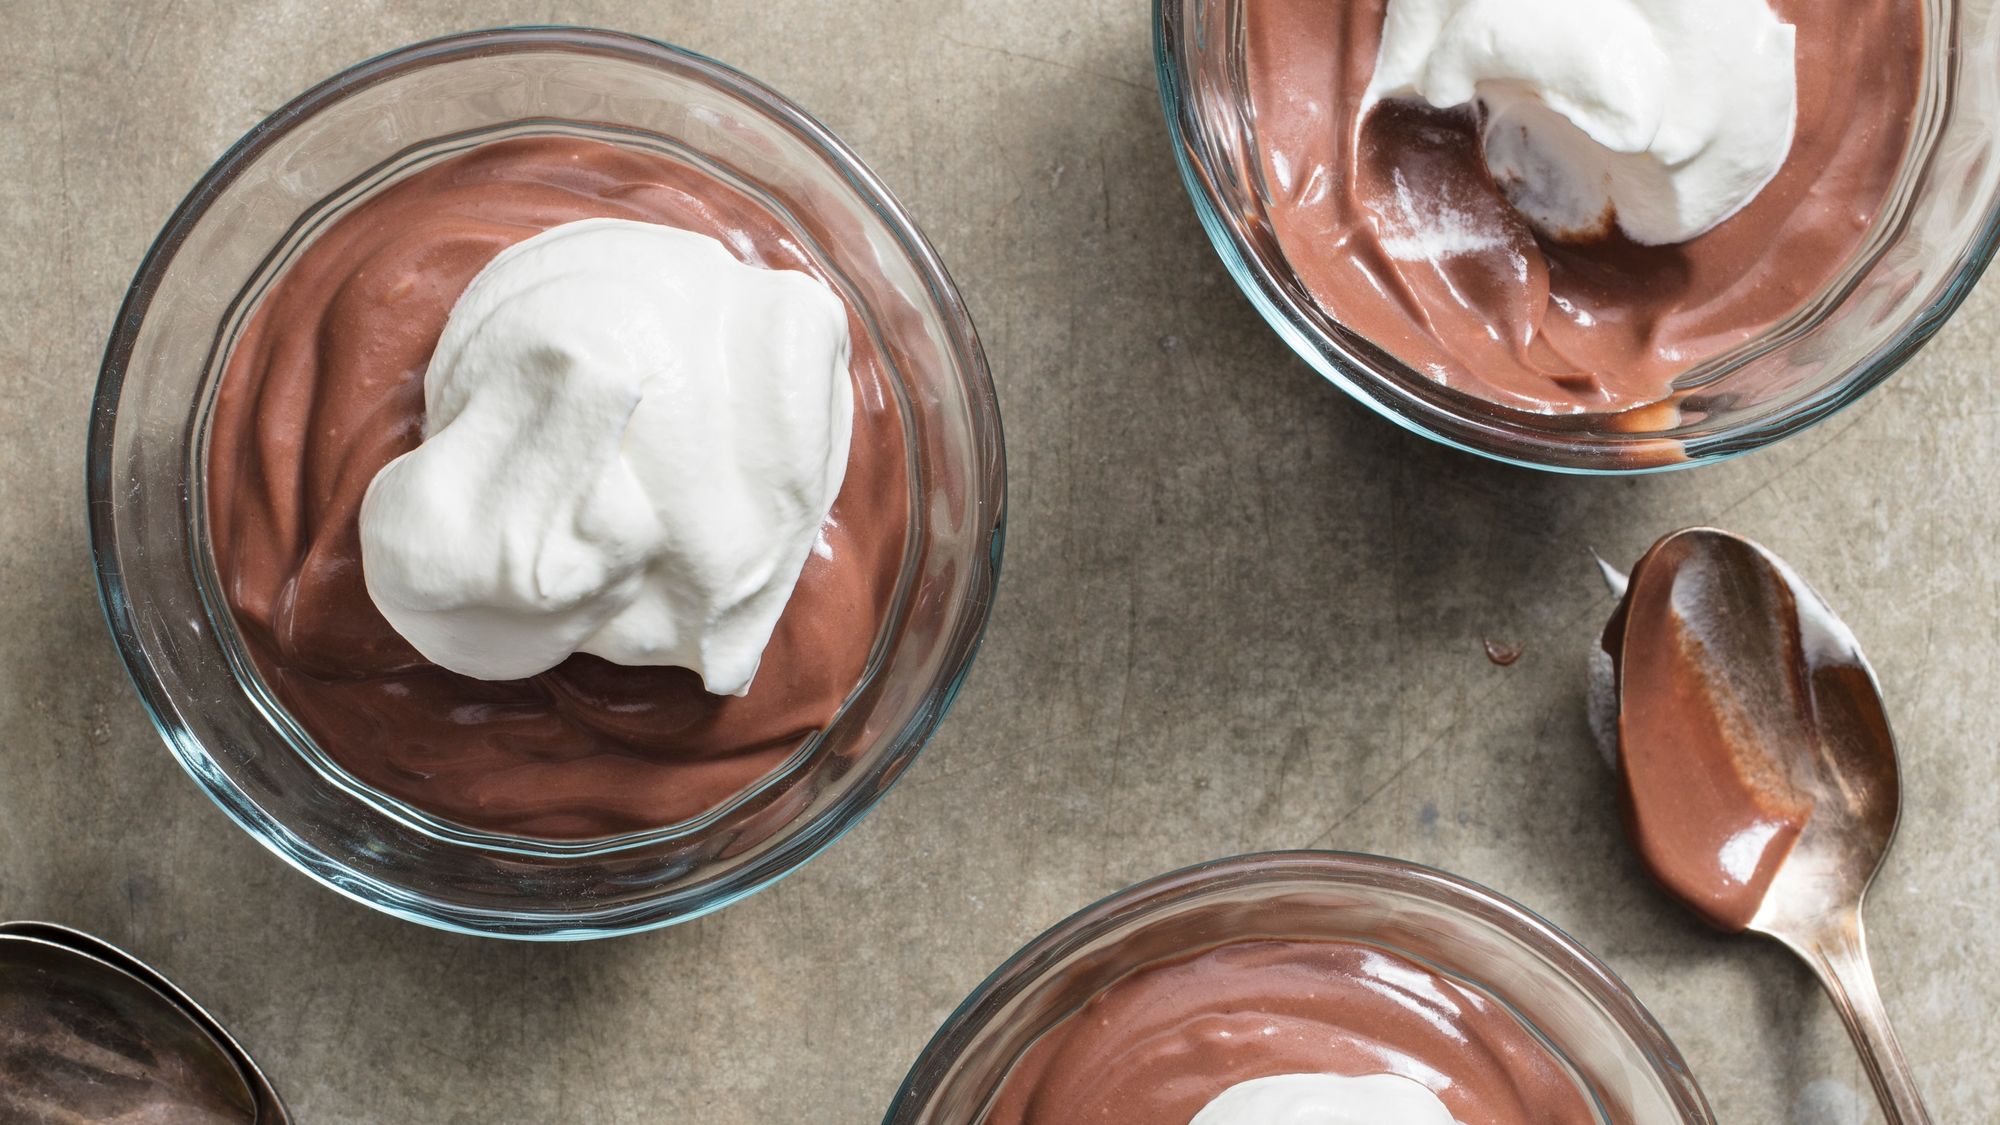 Homemade pudding is the perfect way to end your meal